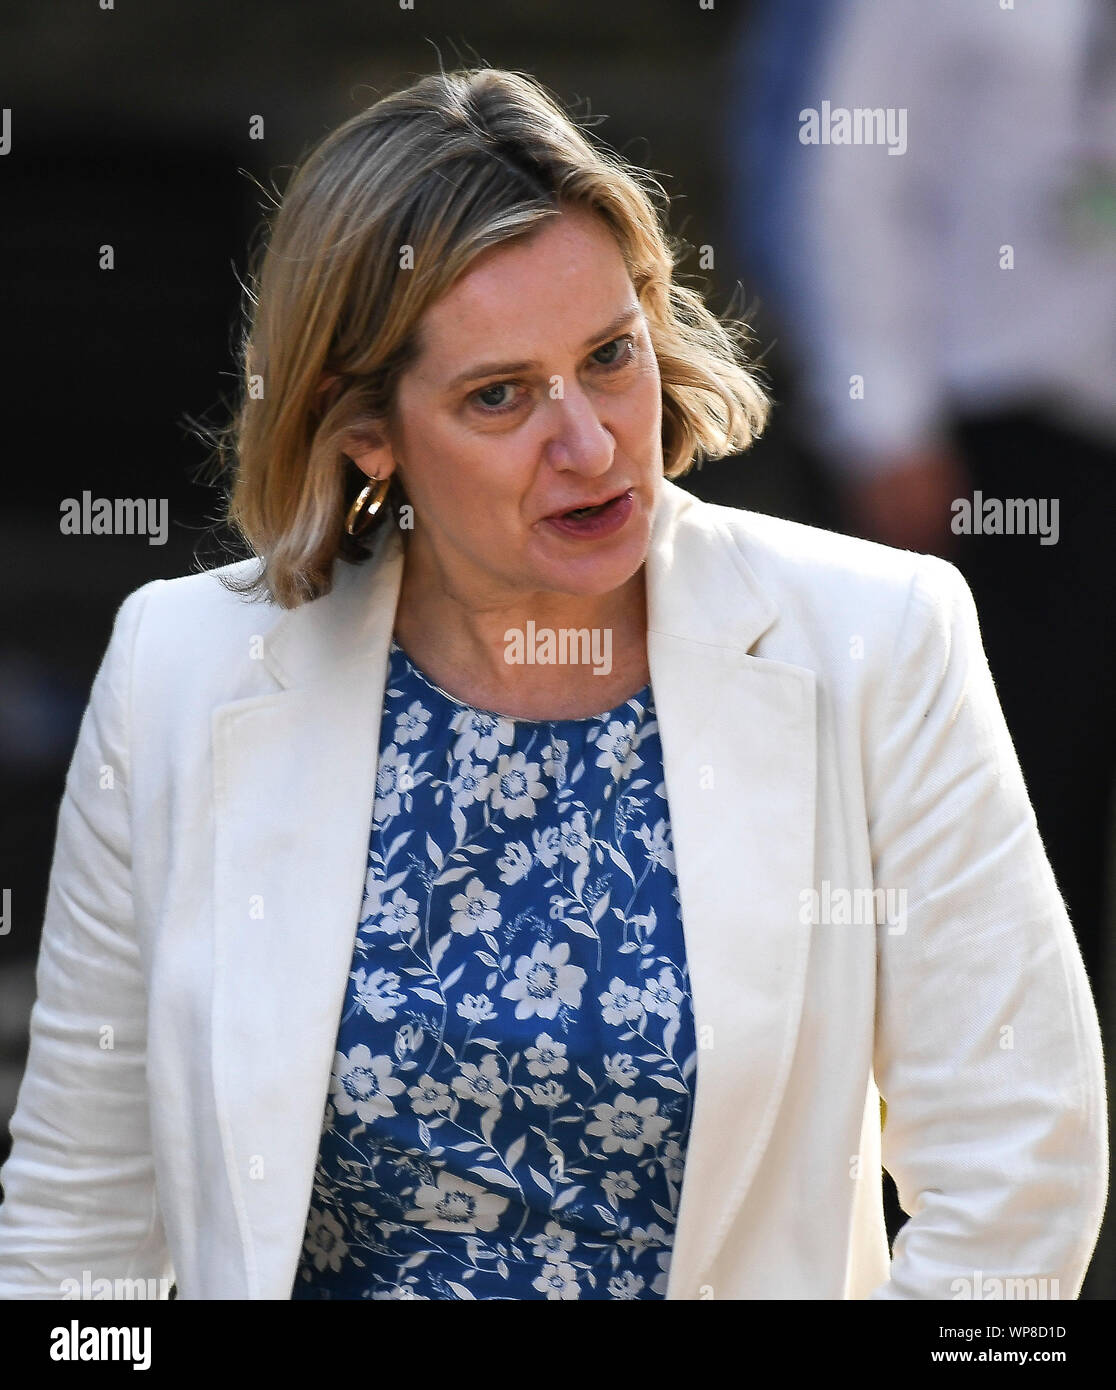 London, UK. 25th July, 2019. Photo taken on July 25, 2019 shows British Work and Pensions Secretary Amber Rudd leaving 10 Downing Street after attending a cabinet meeting in London, Britain. British Work and Pensions Secretary Amber Rudd resigned on Saturday and quitted the Conservative party, dealing one more blow to Prime Minister Boris Johnson, who is fighting an uphill battle to keep his Brexit plan intact despite strong criticism from his own party, opposition and the parliament. Credit: Han Yan/Xinhua/Alamy Live News Stock Photo